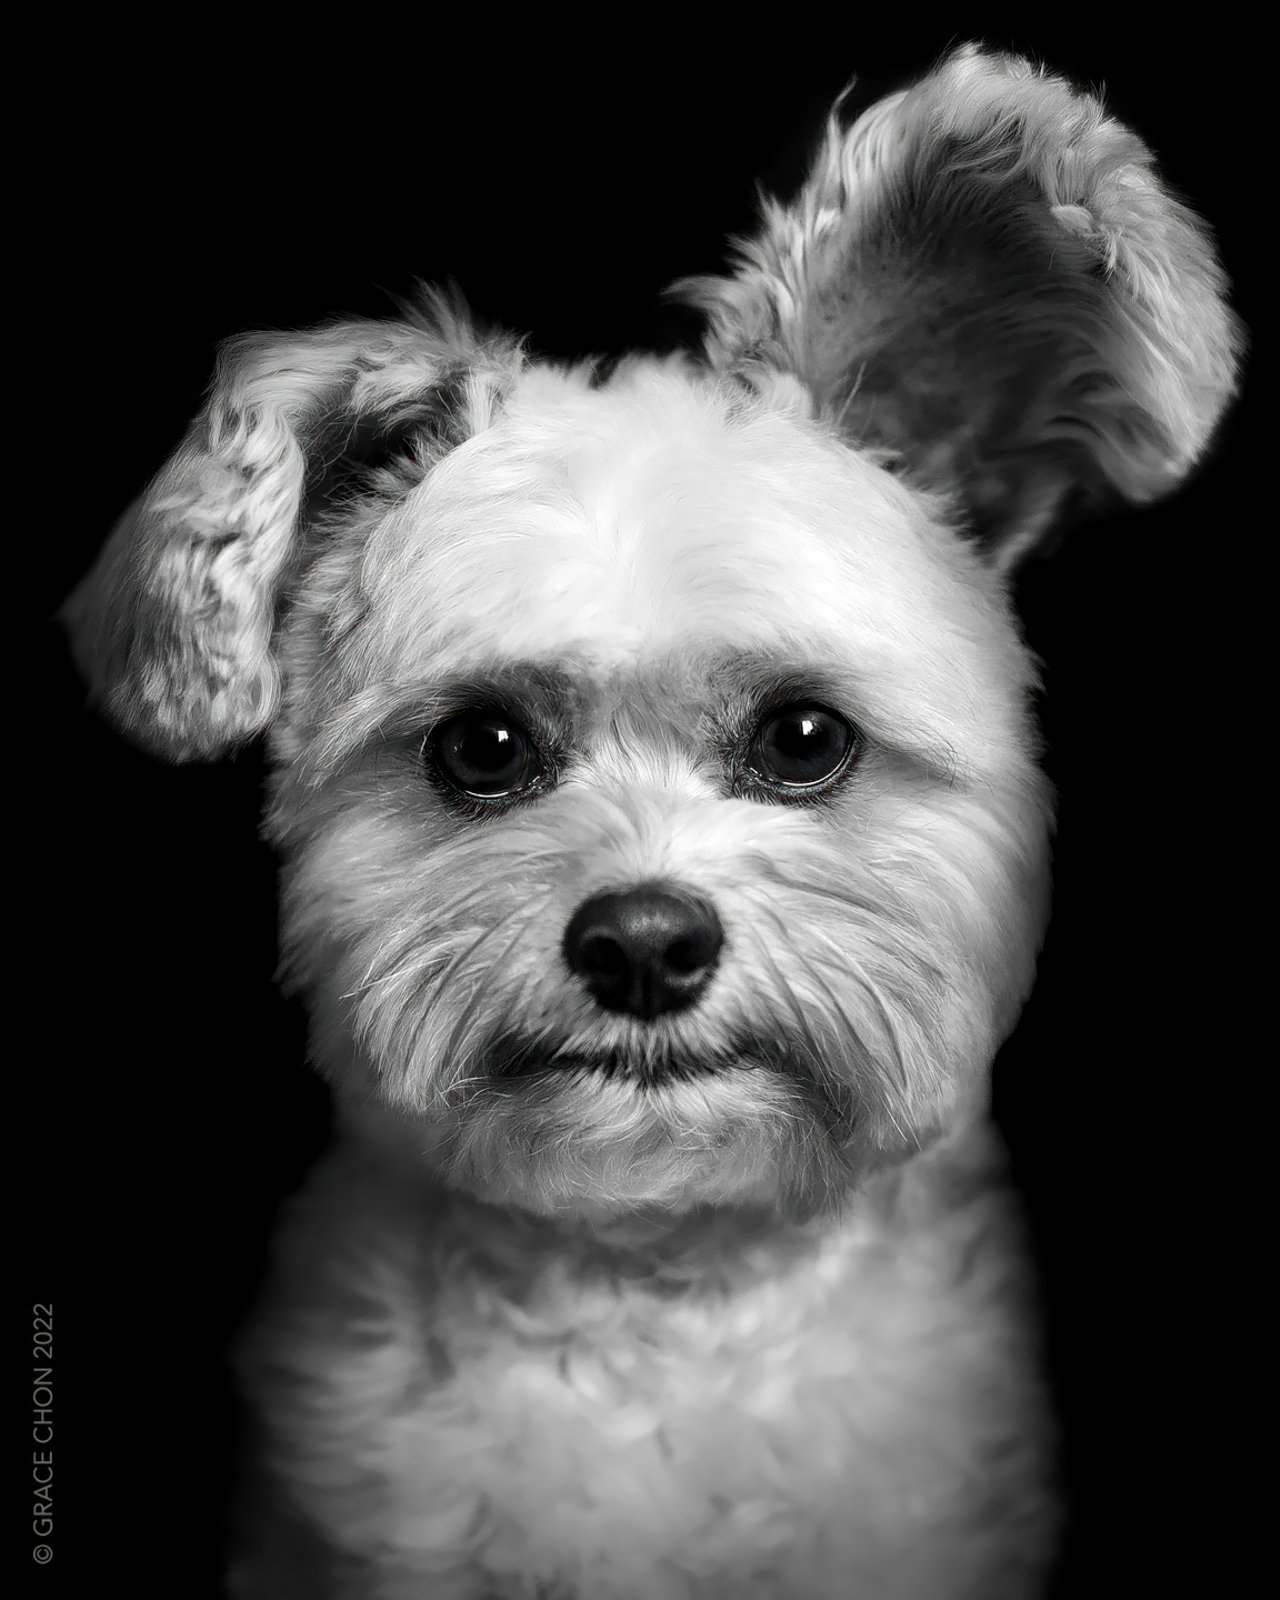 A black and white photo of a small dog with a fluffy coat, a button nose, and round, dark eyes. The dog has one floppy ear and one ear standing upright. The image is set against a black background. The photographer's name, Grace Chon 2022, is faintly visible.